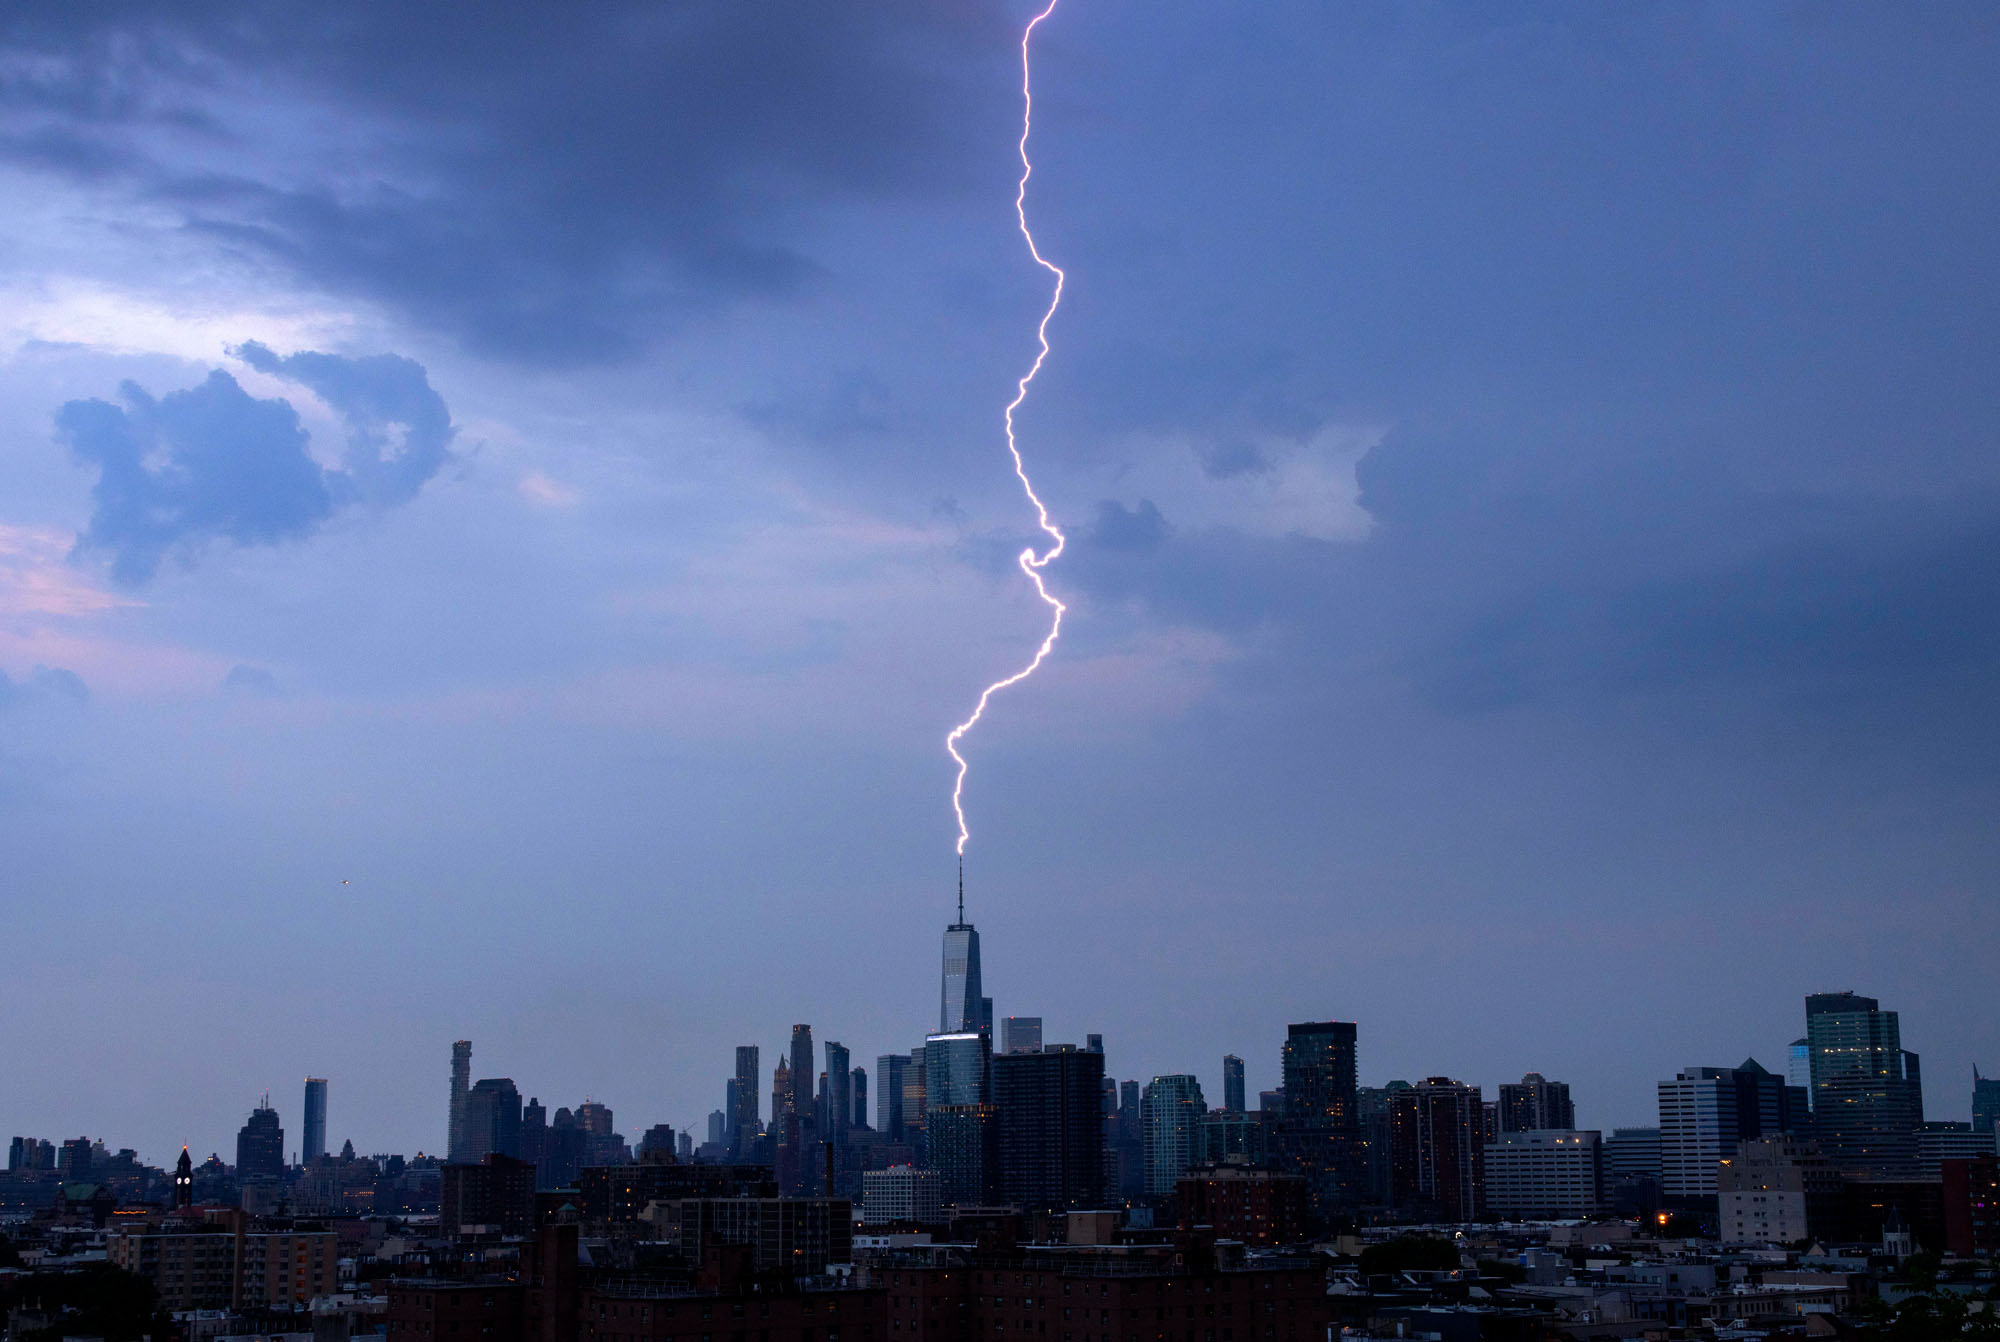 A lightning bolt strikes One World Trade Center during a thunderstorm in New York City.